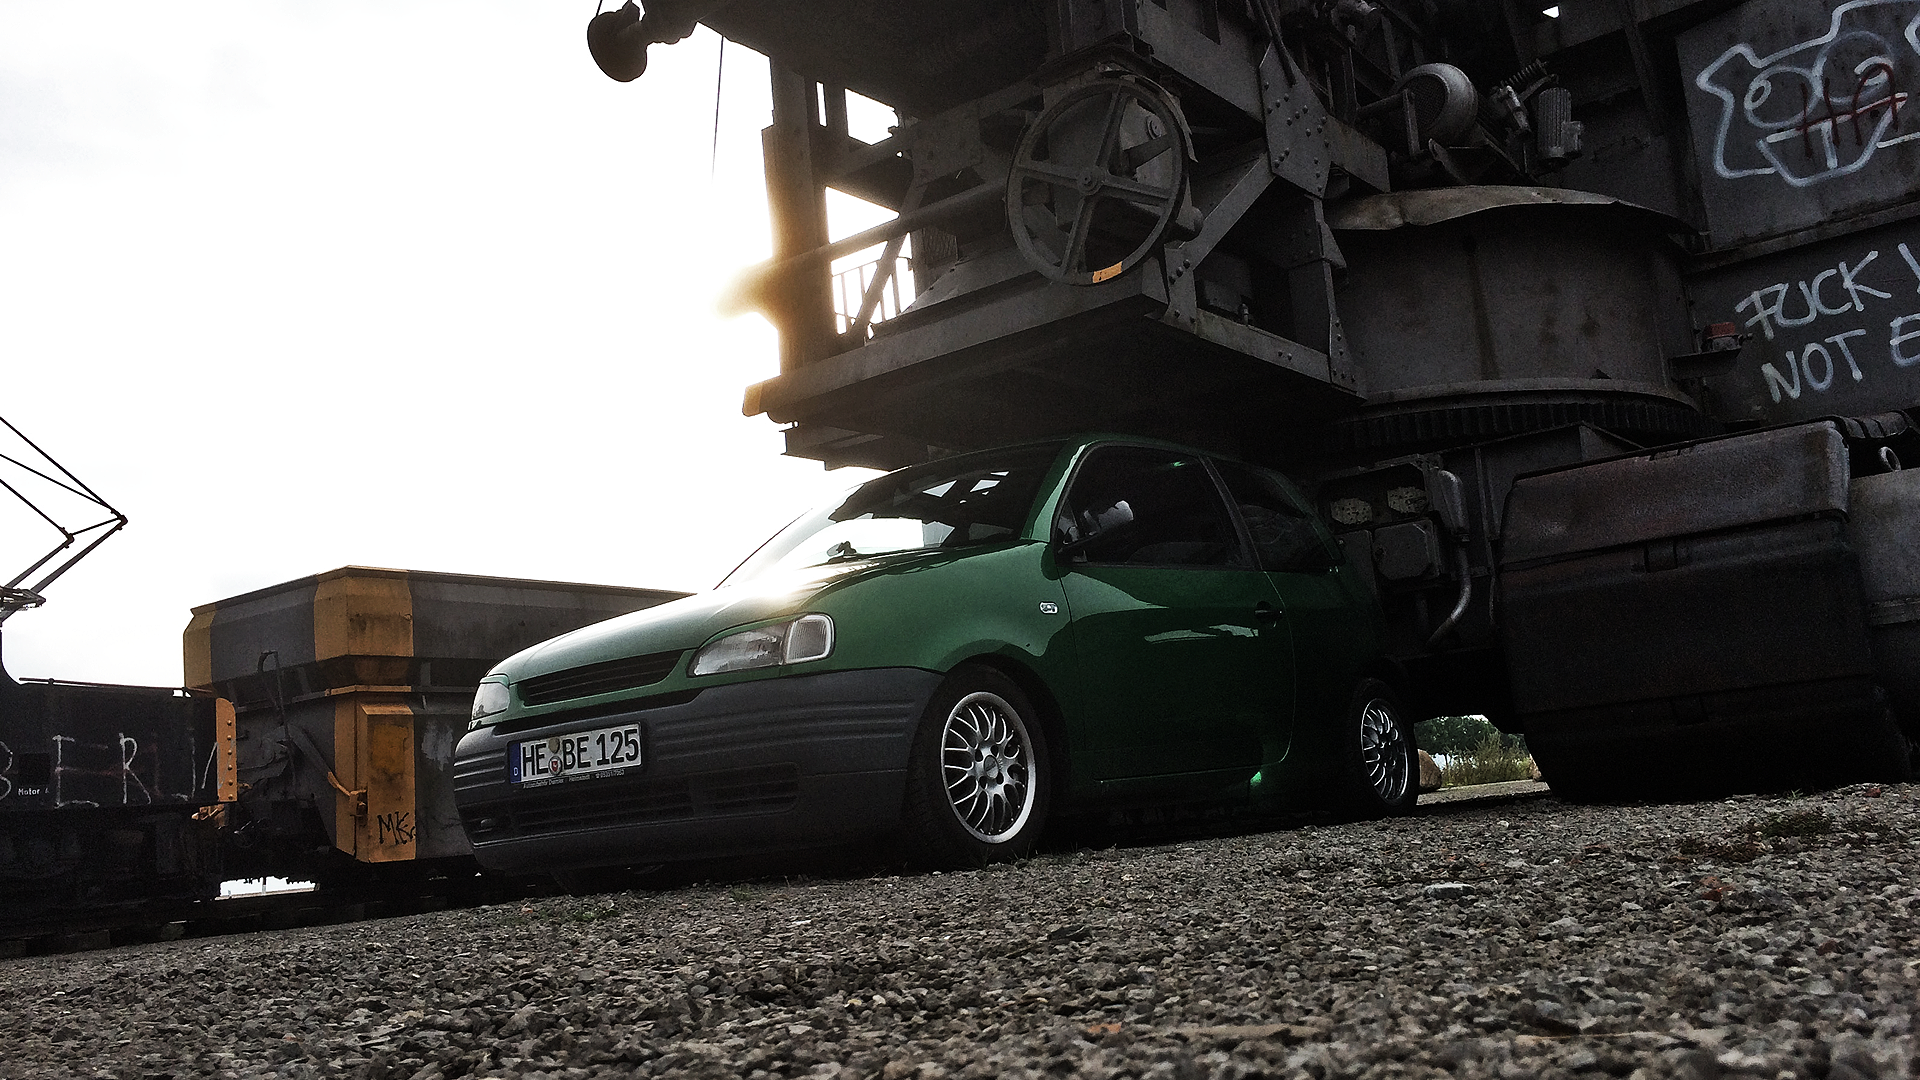 General 1920x1080 low-angle car train Seat Seat Arosa green cars low car vehicle numbers